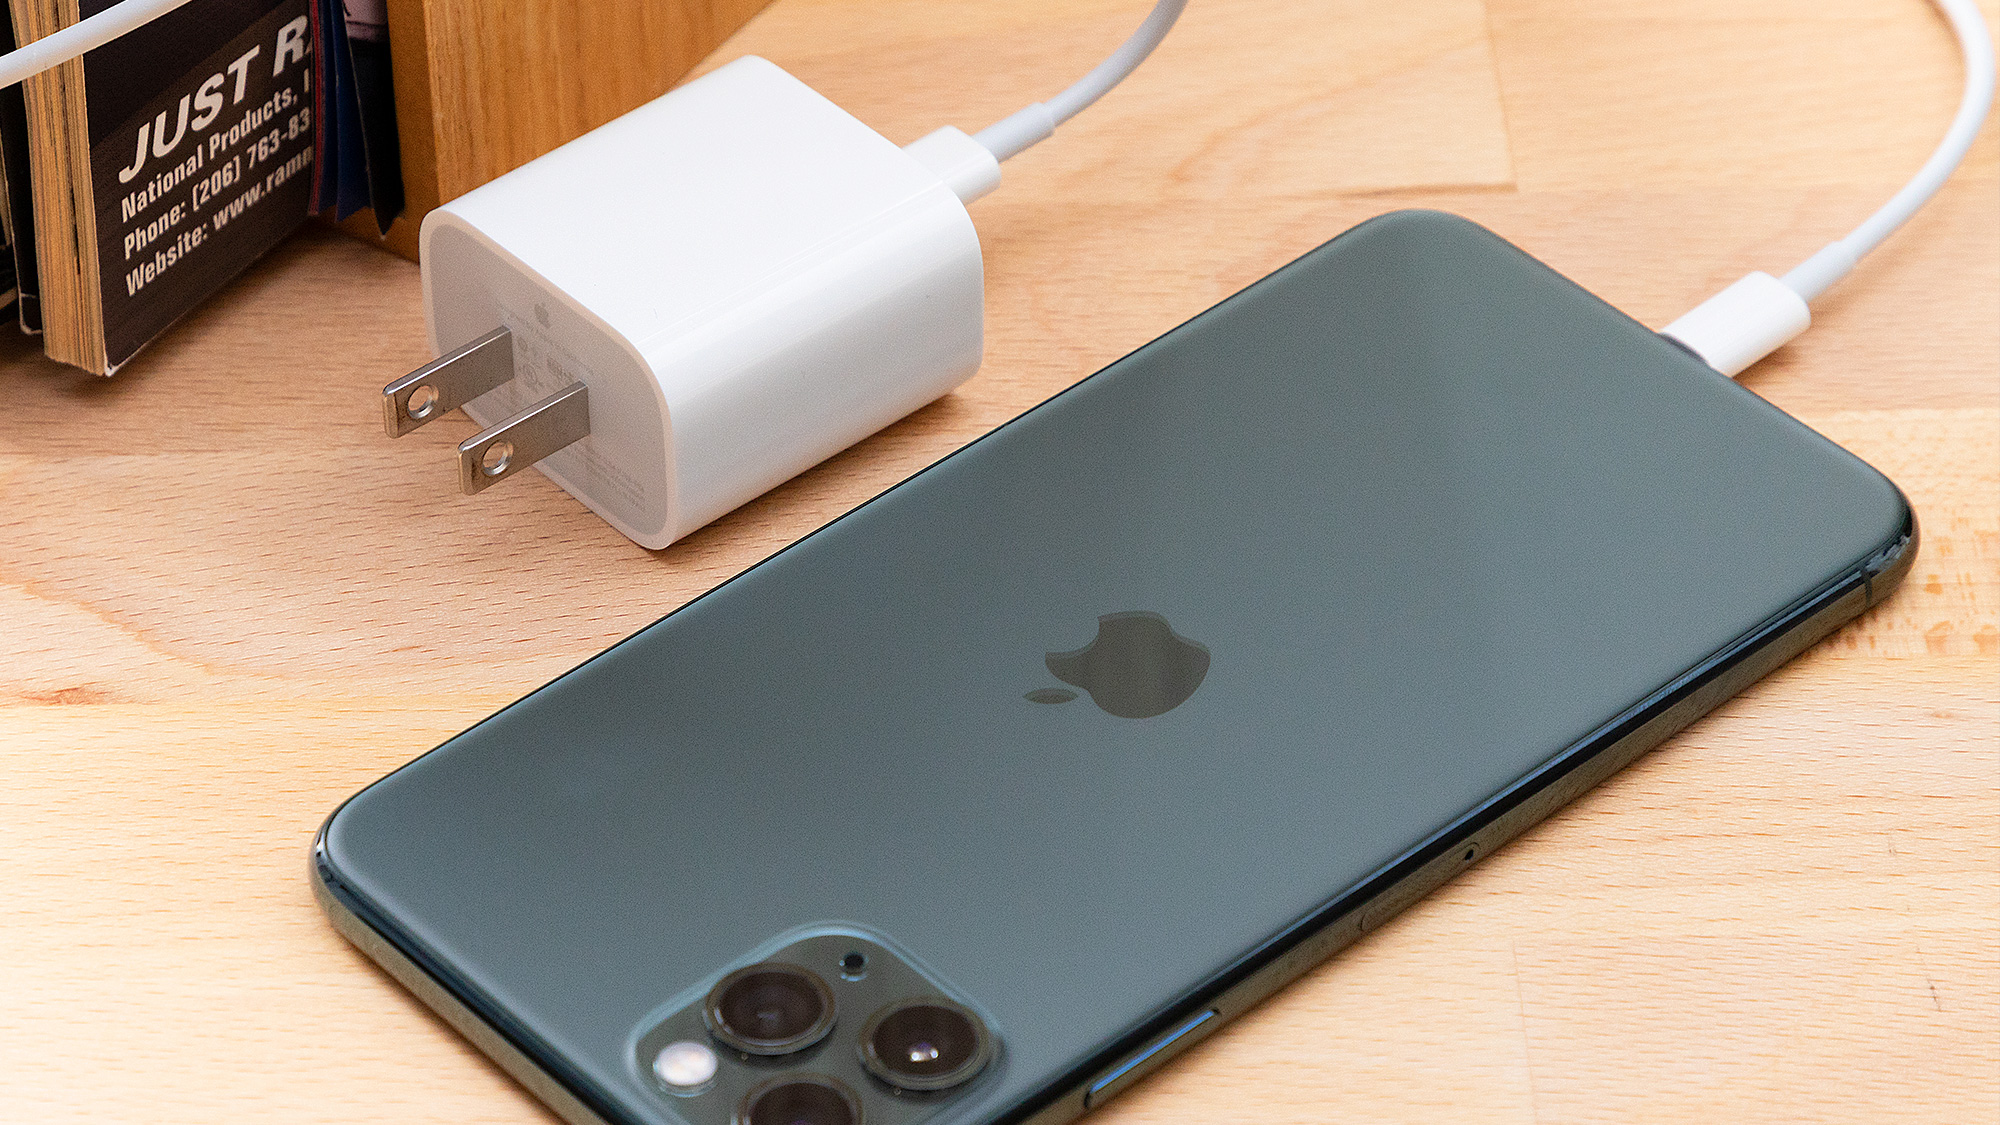 The Portability and Convenience of the iPhone 14 Charger